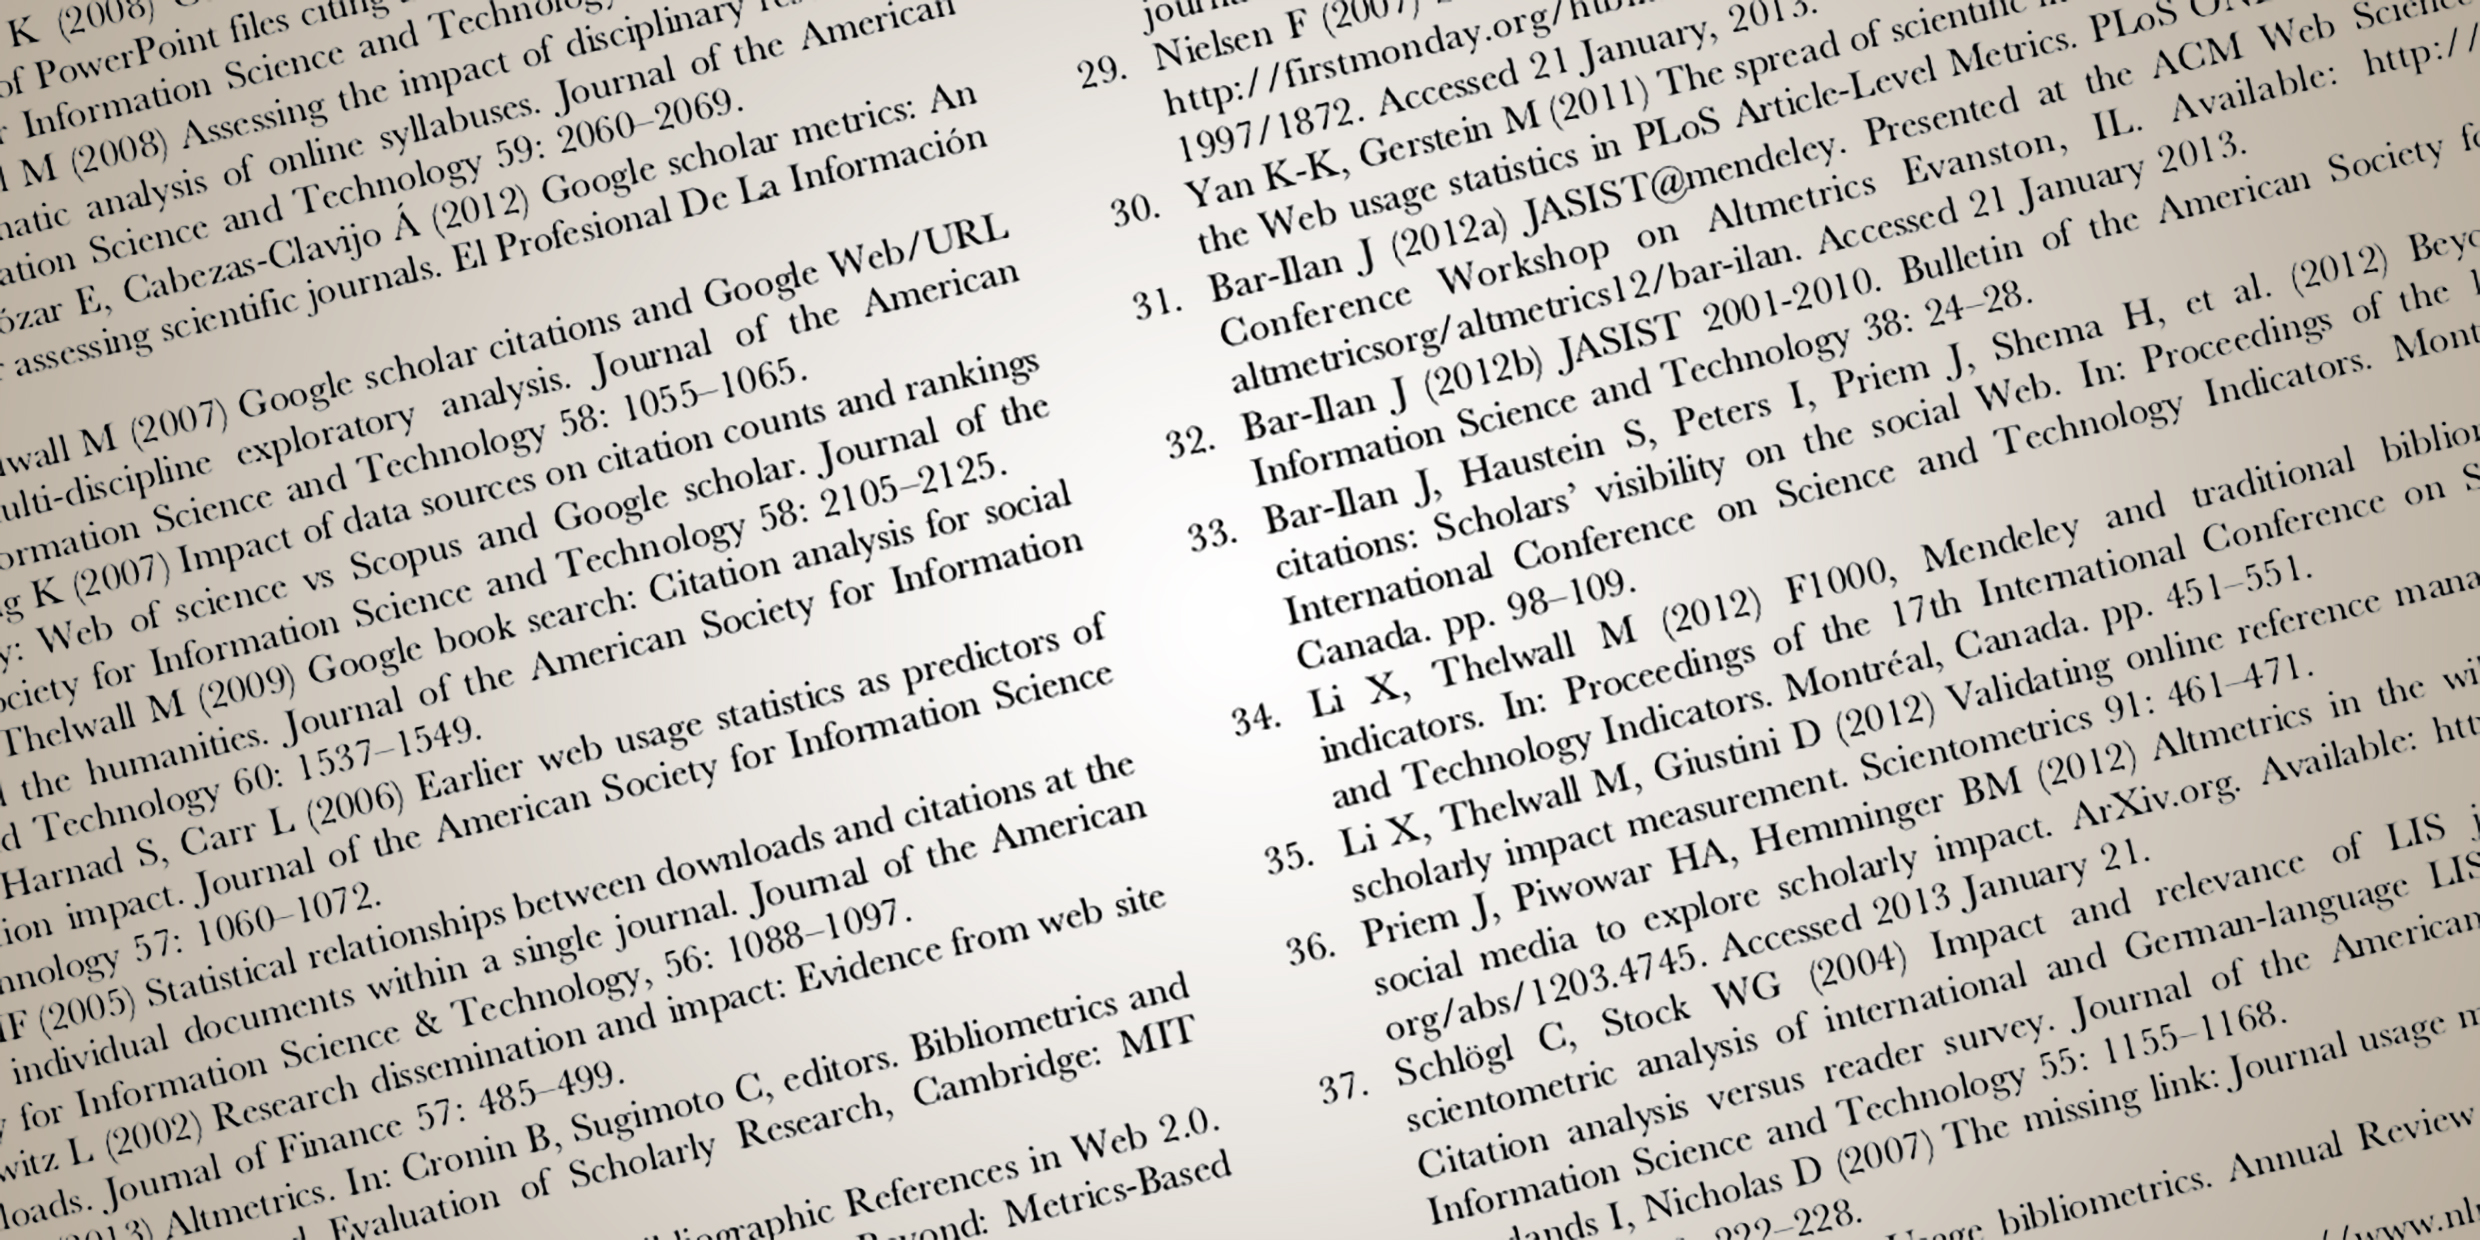 Image of long list of citations in scientific journal